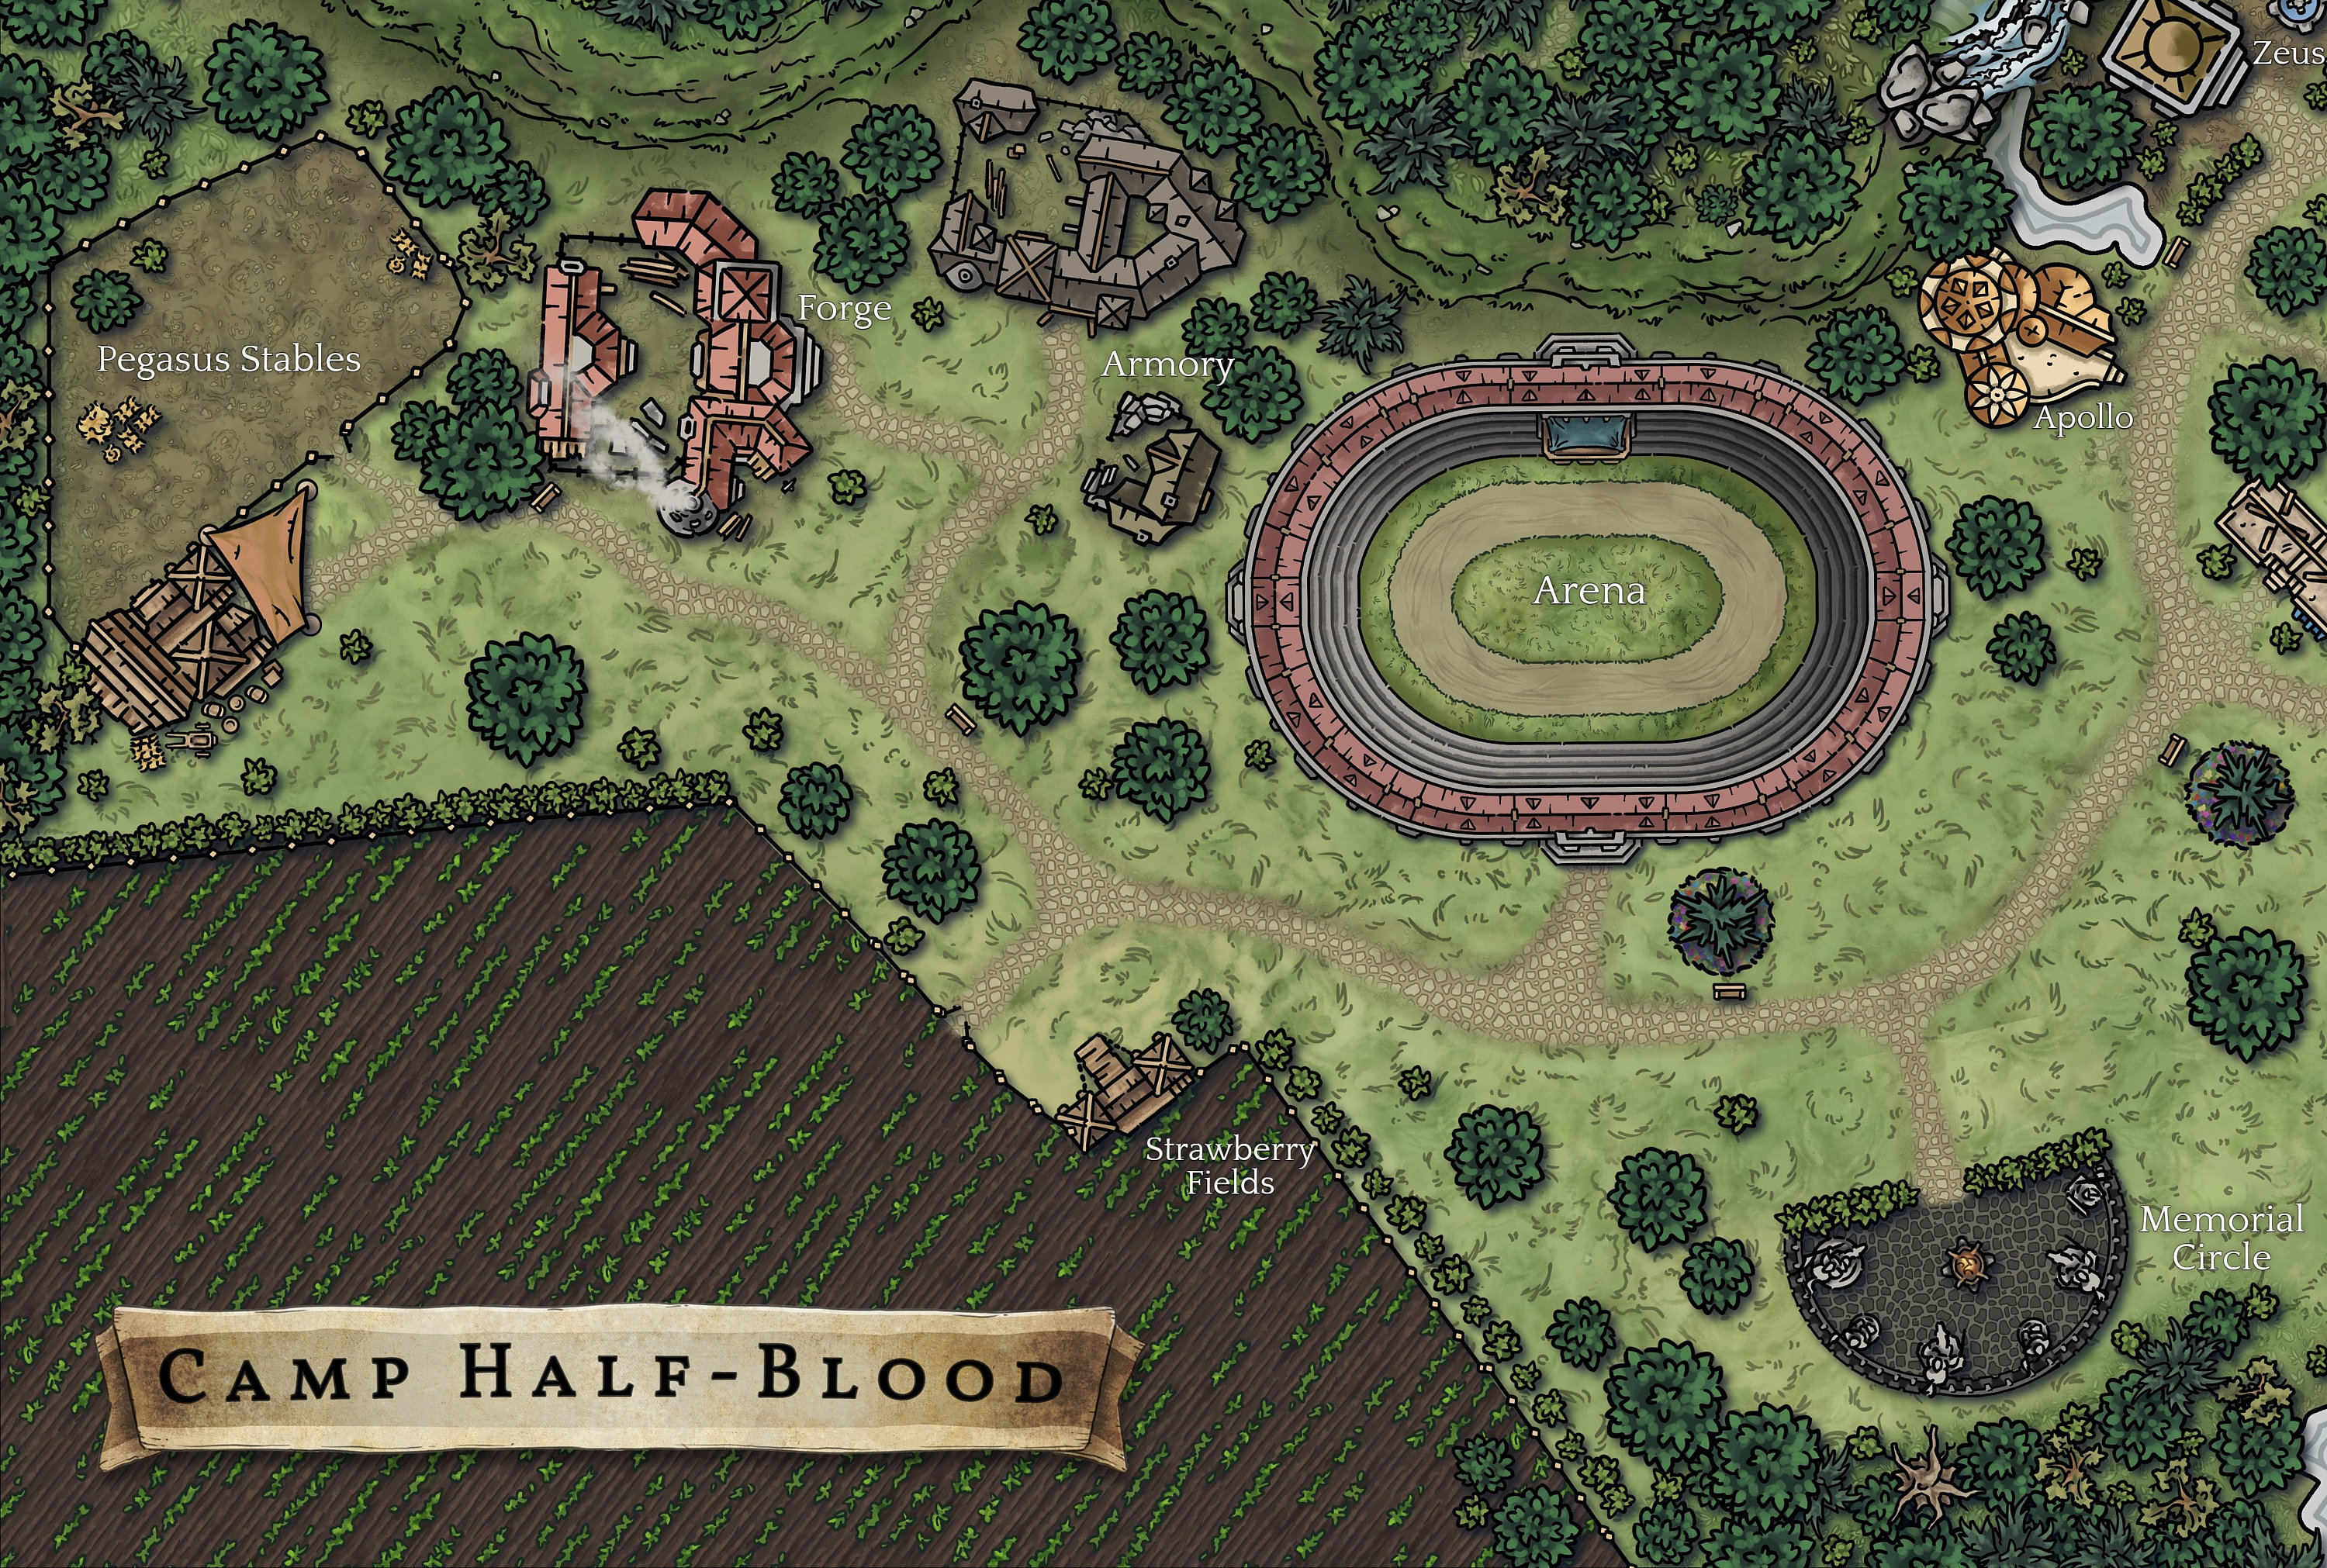 Map of Camp Half-Blood, Cakes By Mylene